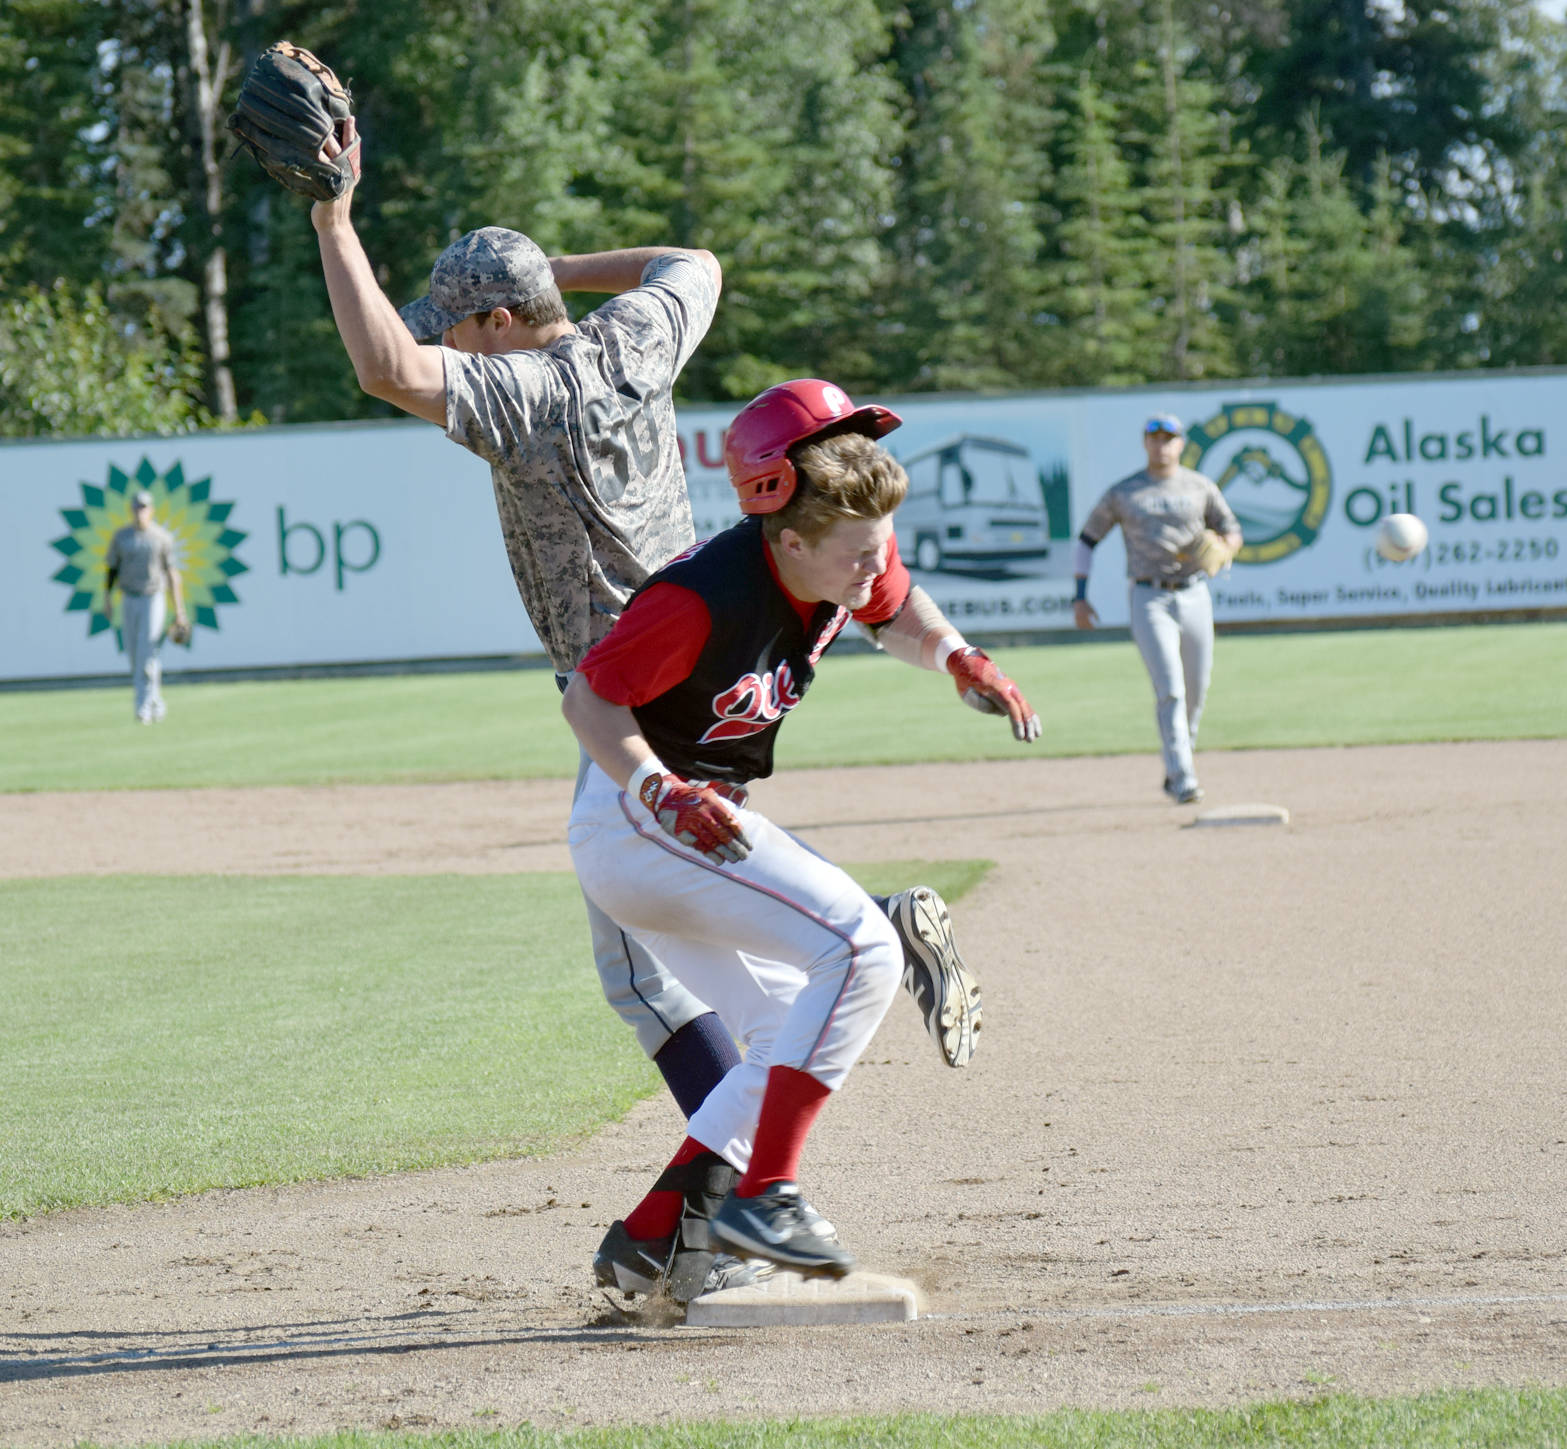 Kellen Strahm beats out a single in the bottom of the first inning as the ball gets away from Chugiak-Eagle River Chinooks first baseman Luke Coffey on Thursday, July 27, 2017, at Coral Seymour Memorial Park in Kenai. (Photo by Jeff Helminiak/Peninsula Clarion)